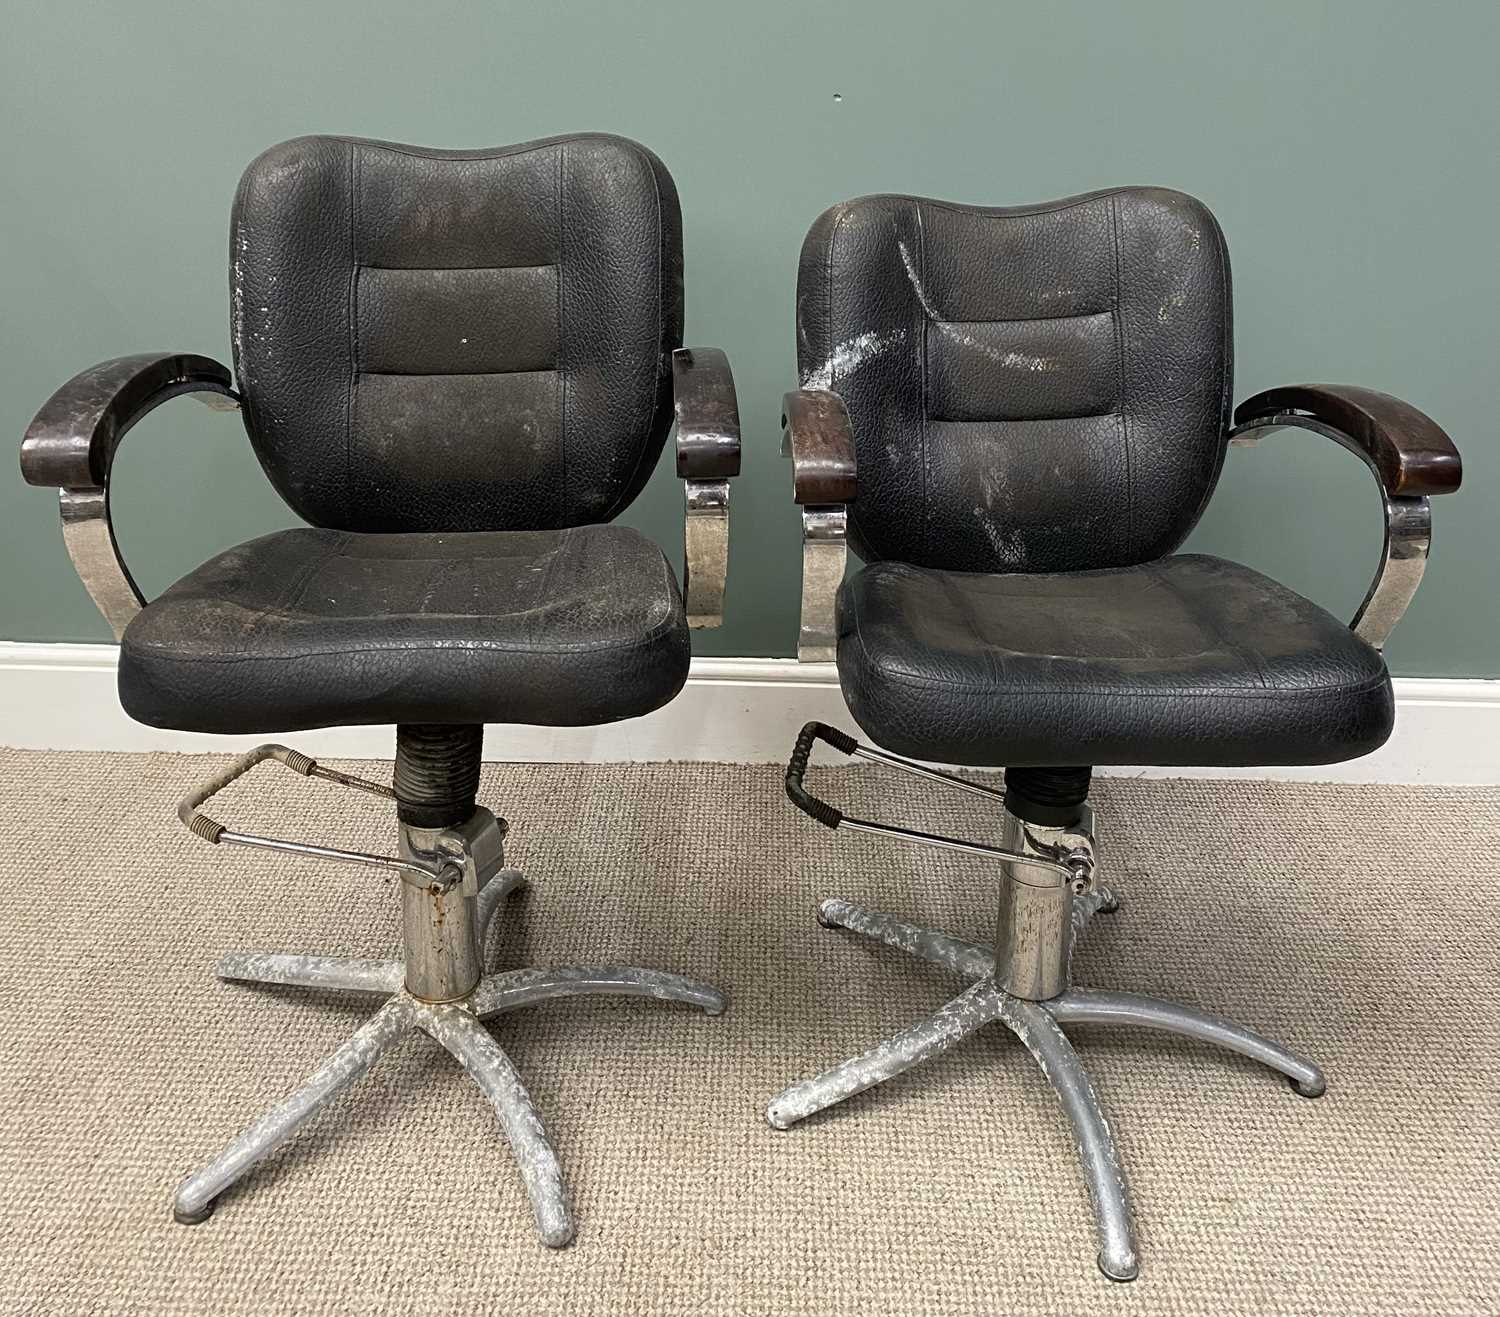 TWO VINTAGE ADJUSTABLE BARBERS' CHAIRS, 90 (h), 60 (w), 44 (d) cms Provenance: Private collection